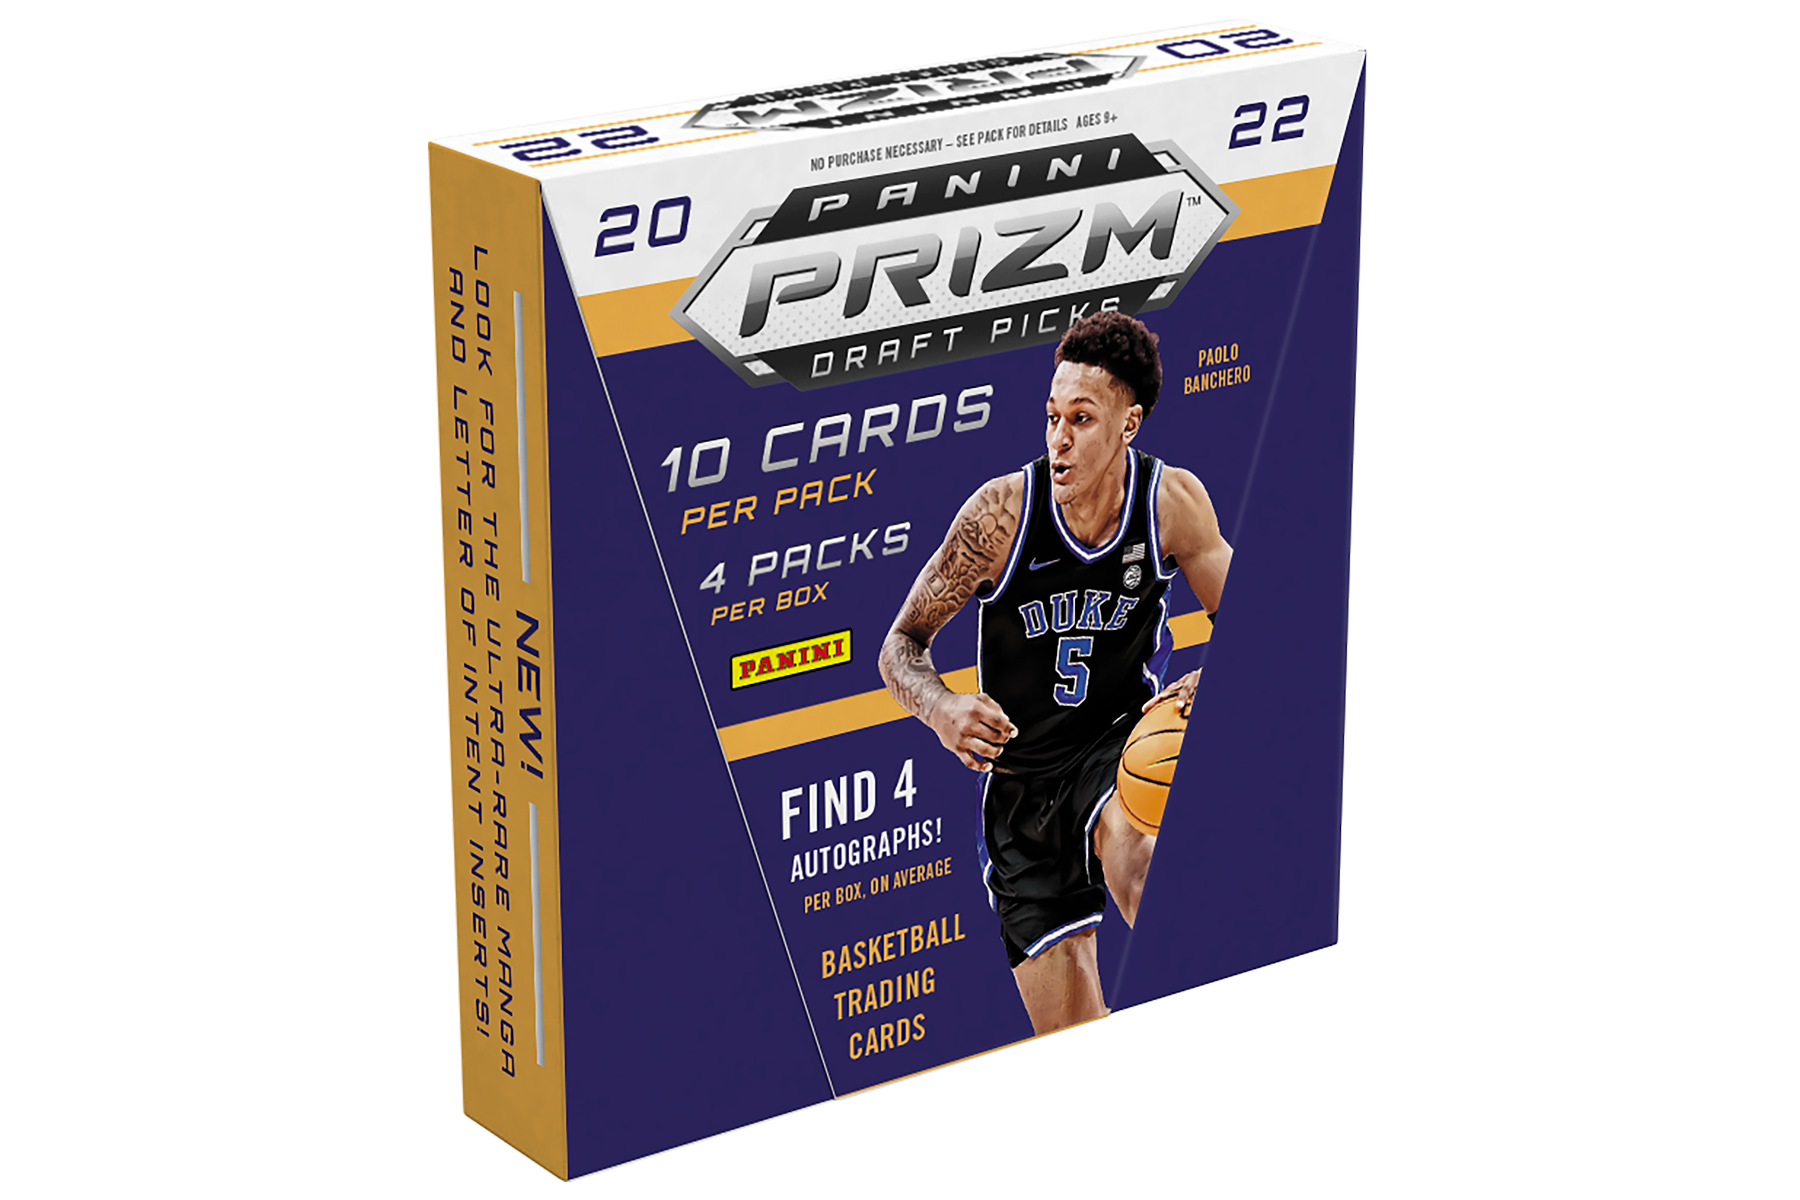 AVAILABLE TOMORROW (2/17)  2022 Prizm Draft Picks Collegiate Basketball  HOBBY – The Knight's Lance